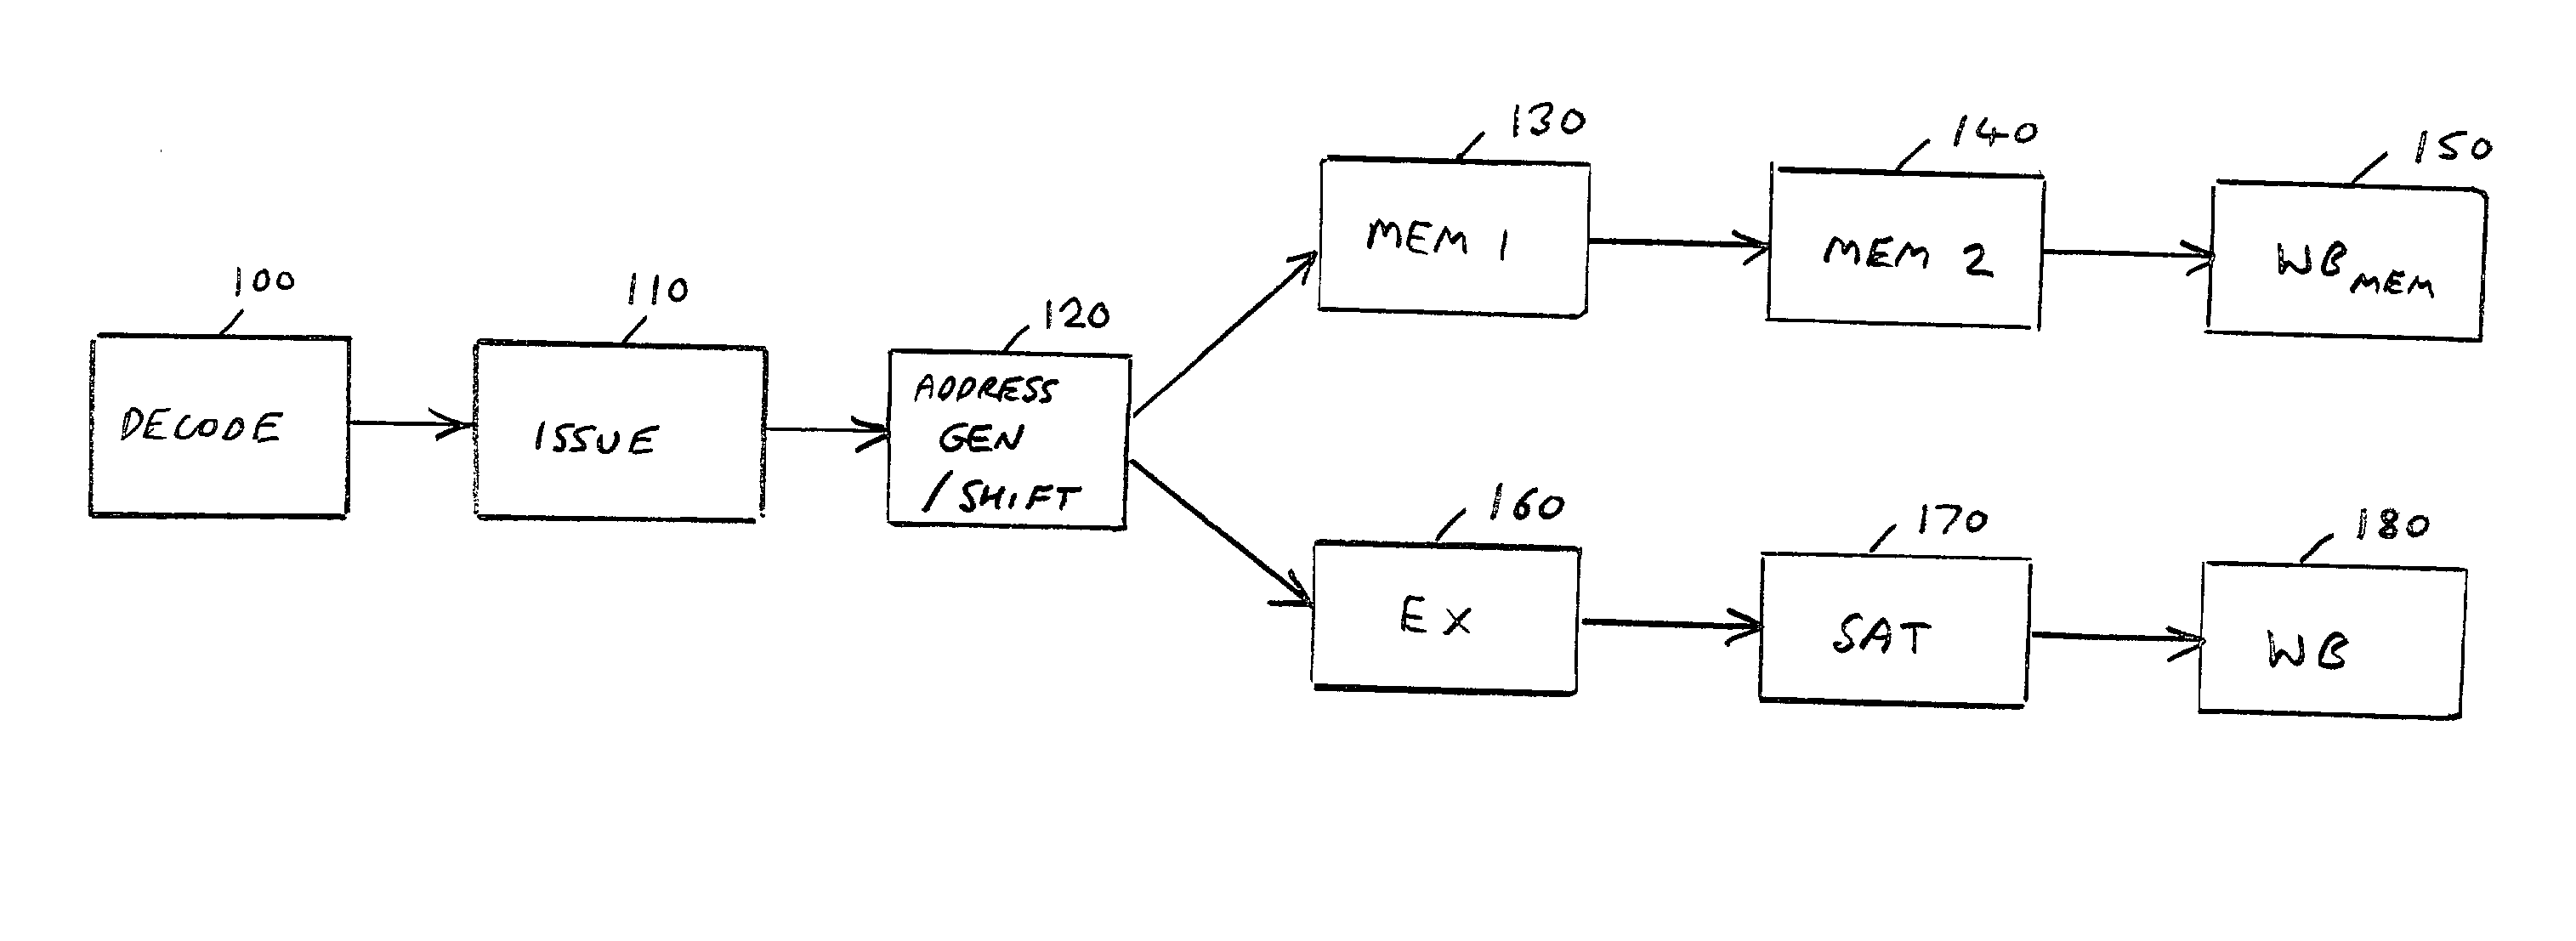 Synchronising pipelines in a data processing apparatus